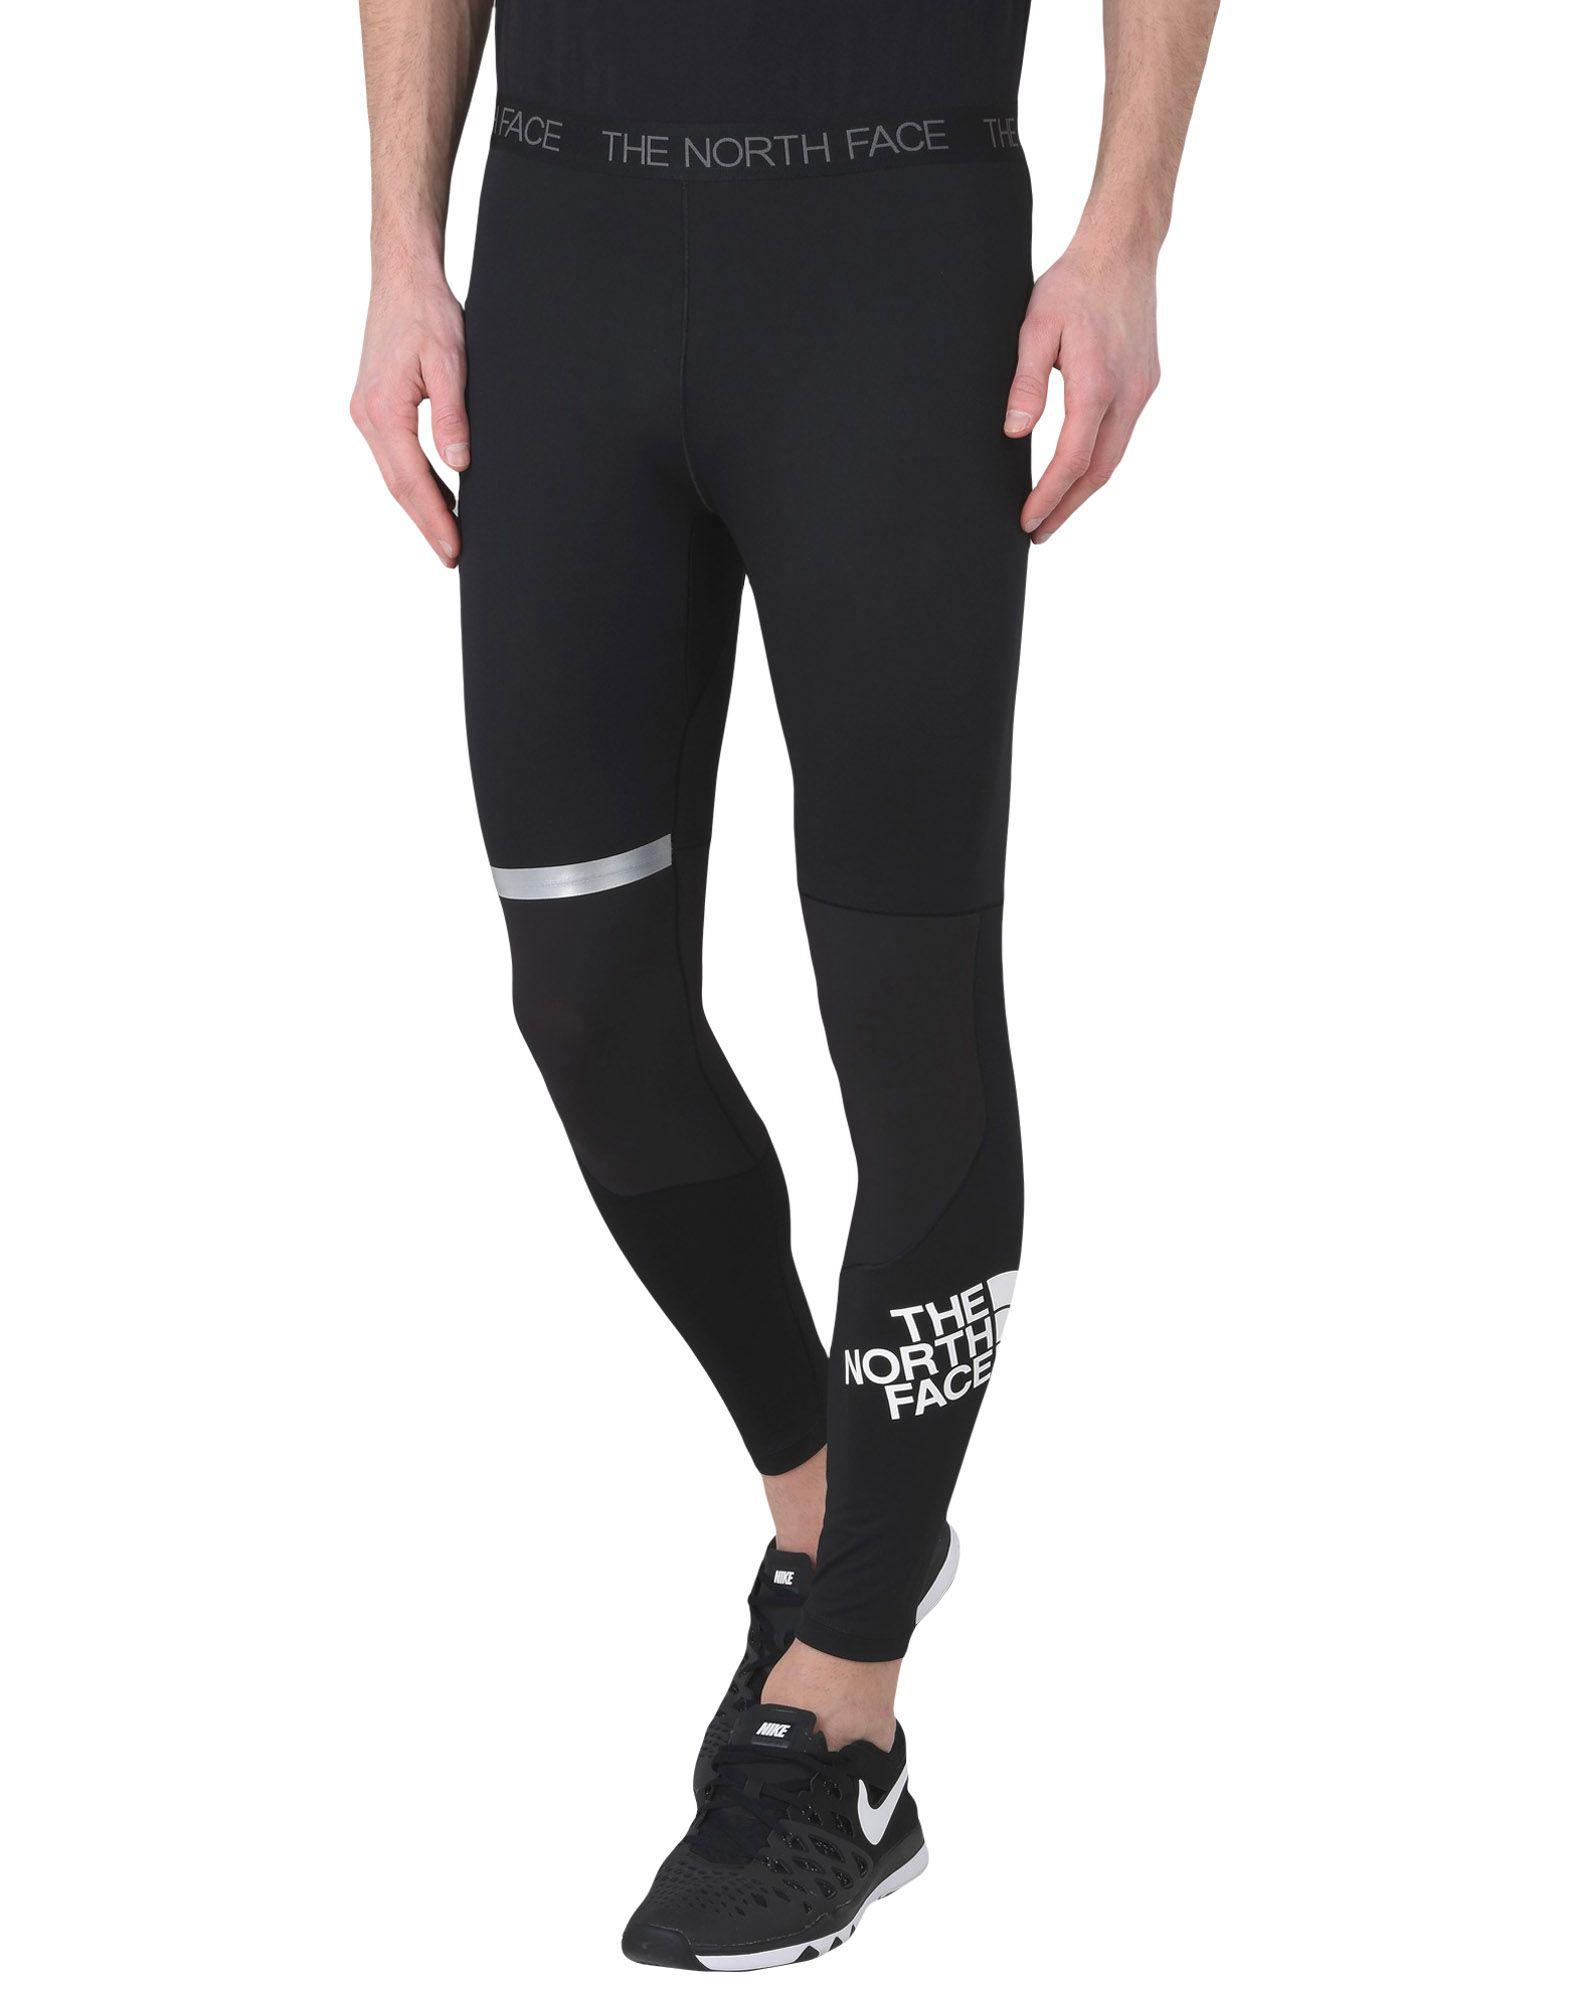 The North Face Synthetic Leggings in Black for Men - Lyst